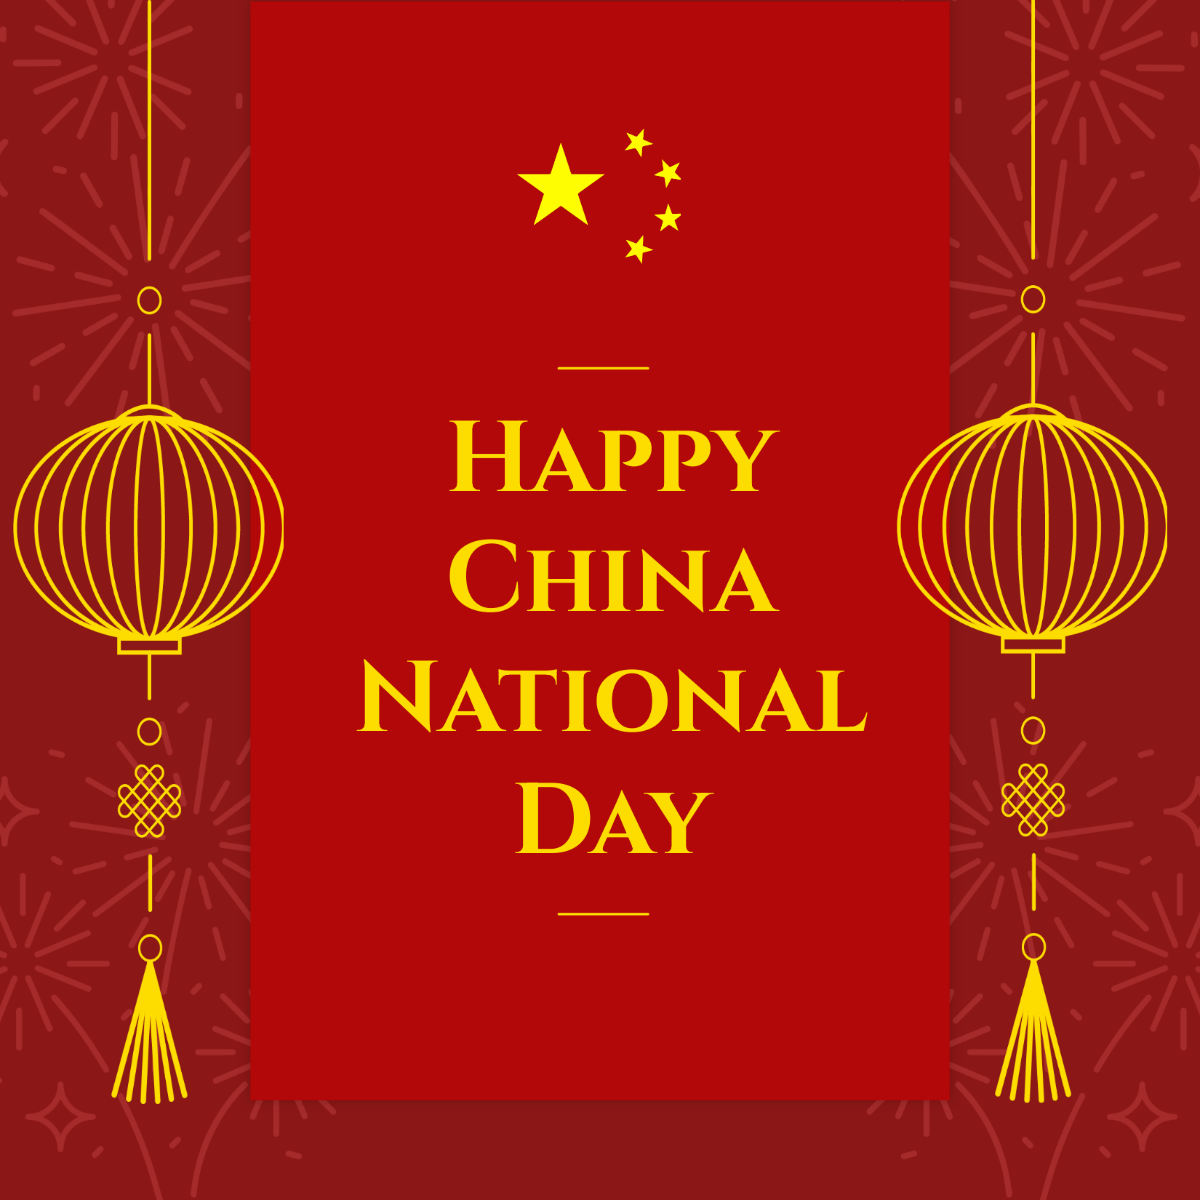 Free China National Day Instagram Post Template